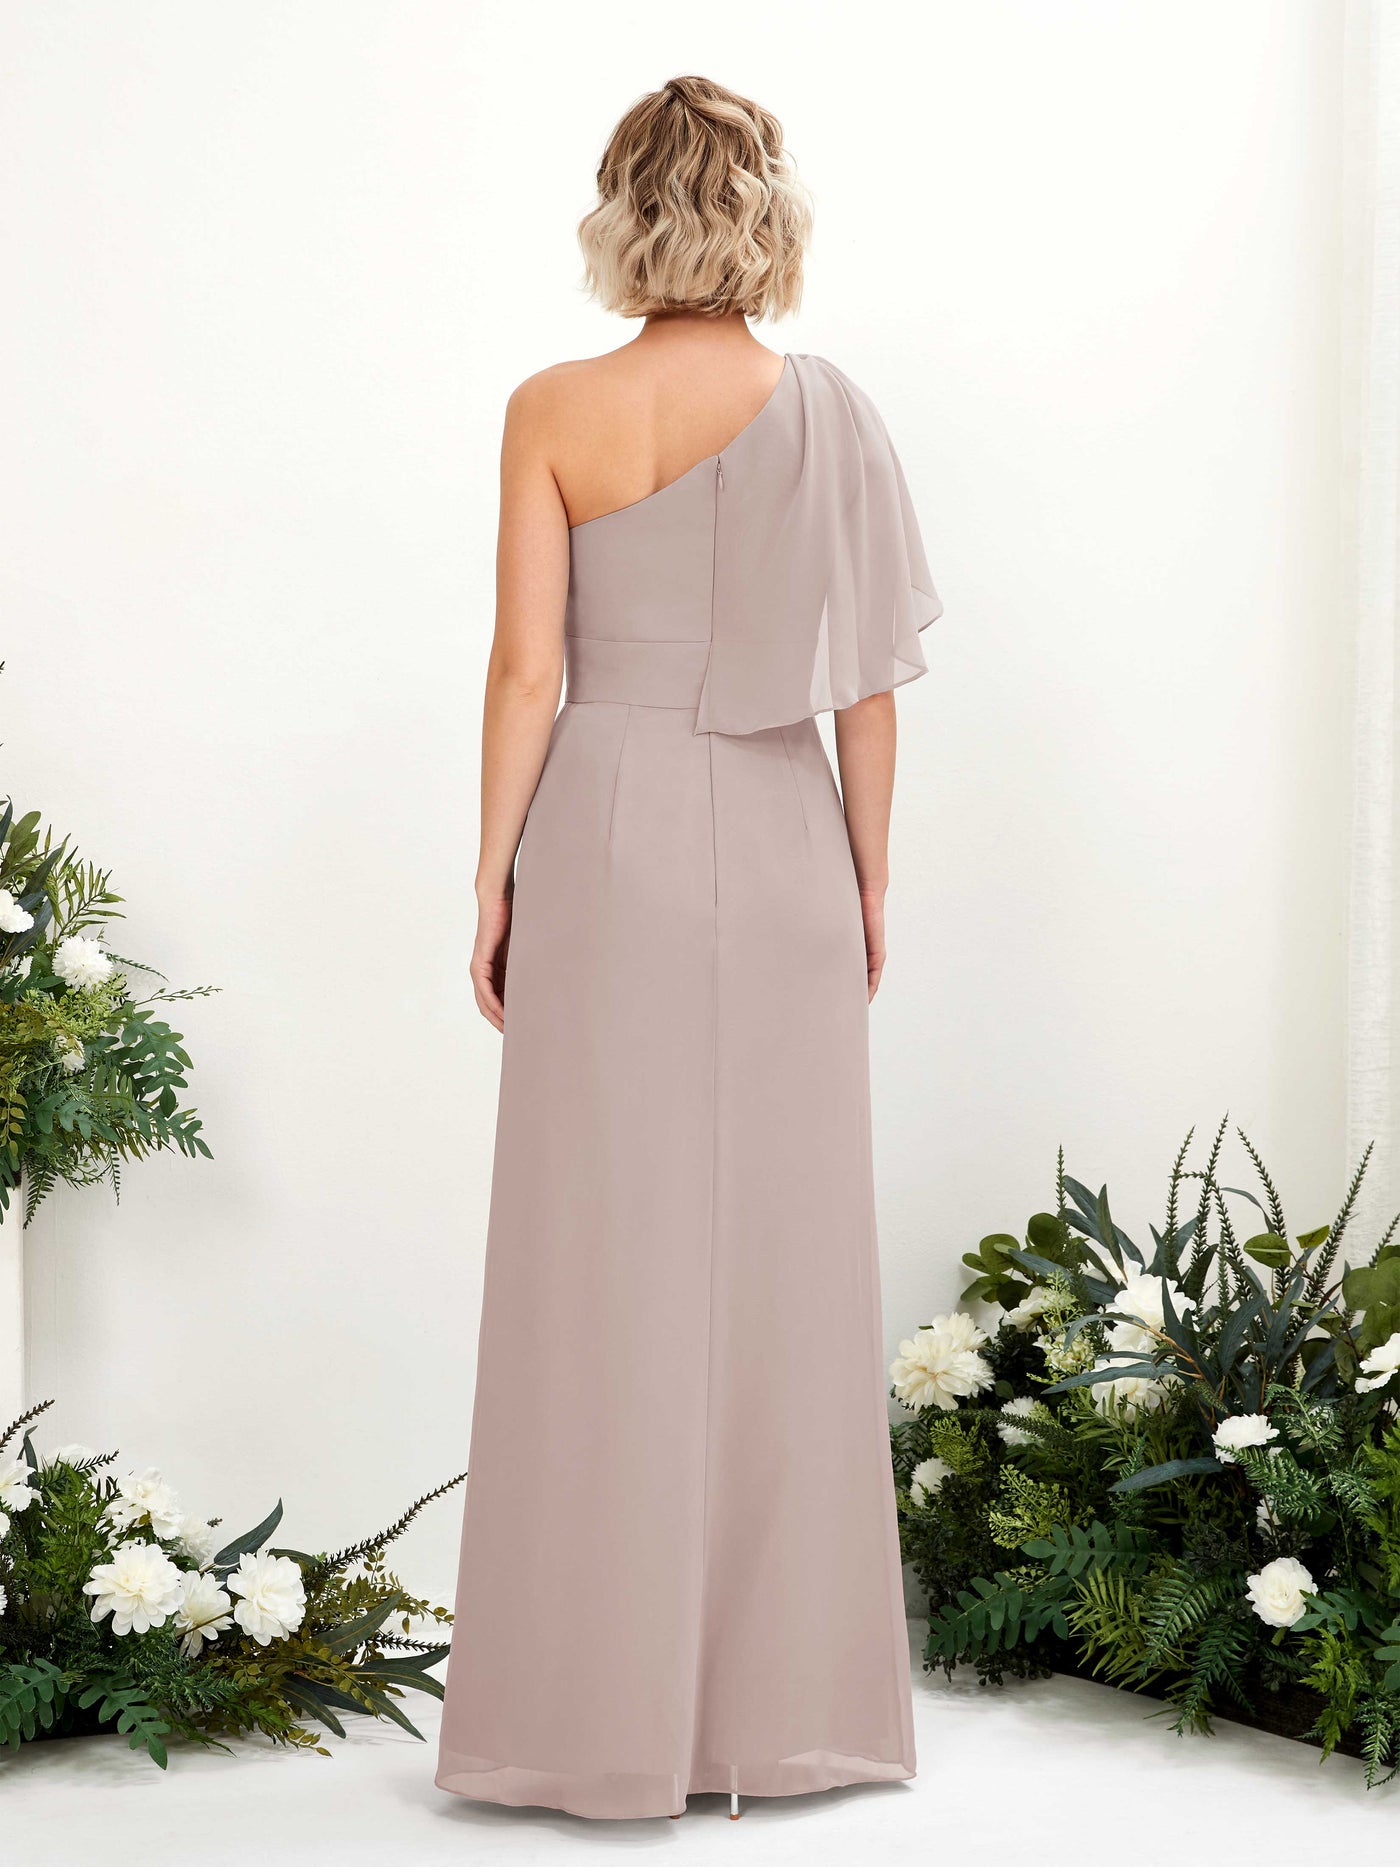 Taupe Bridesmaid Dresses Bridesmaid Dress Ball Gown Chiffon Full Length Short Sleeves Wedding Party Dress (81223724)#color_taupe